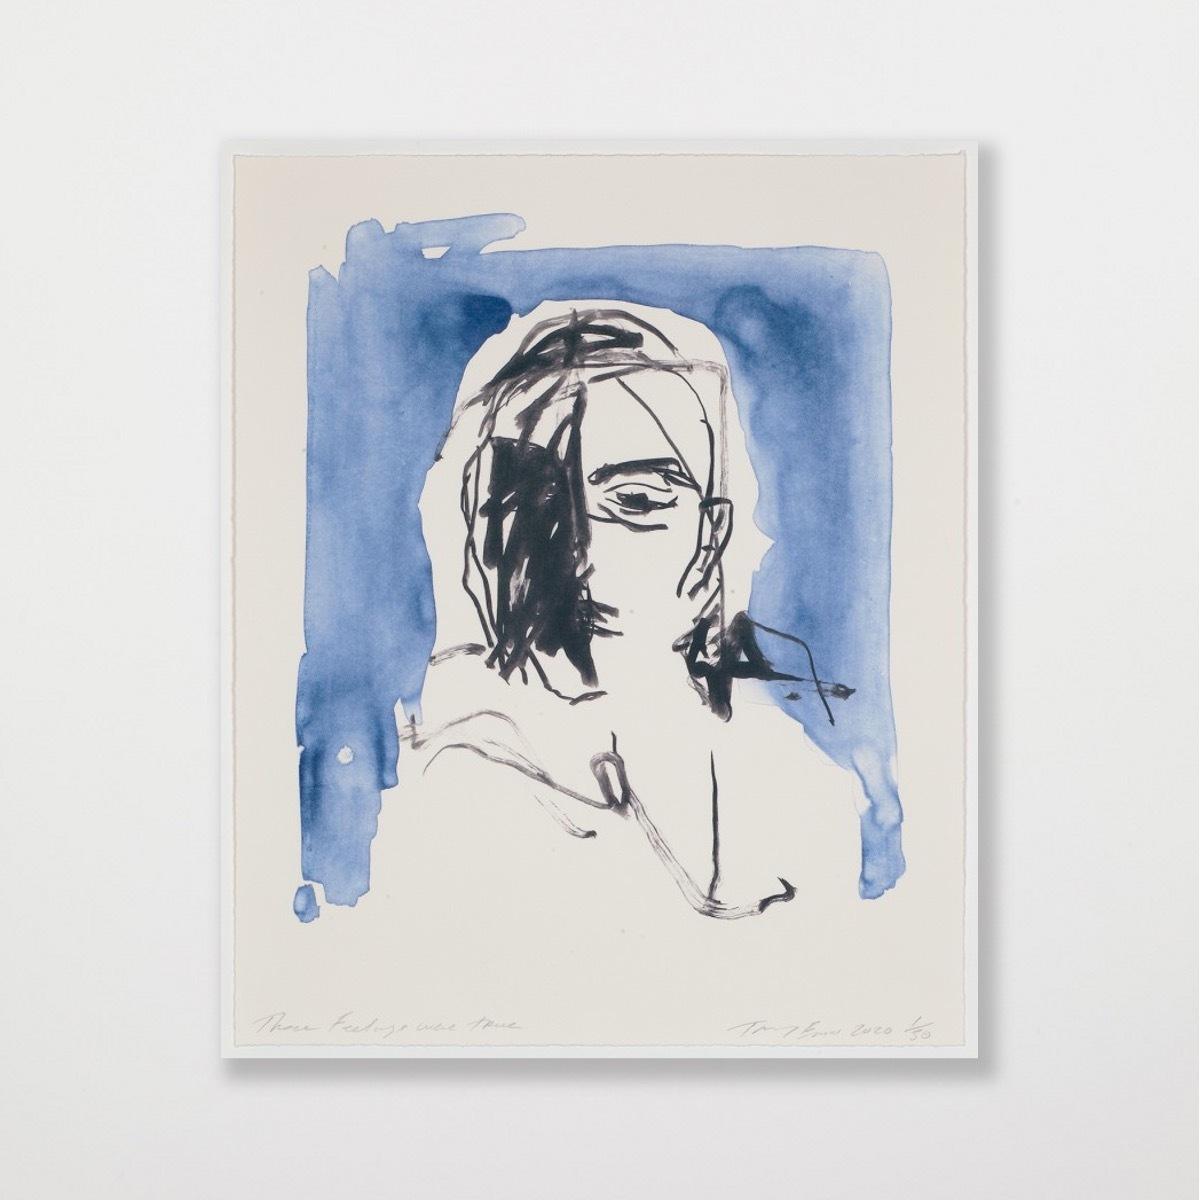 These Feelings Were True -Emin, Contemporary, YBAs, Lithograph, Blue, Portrait For Sale 4